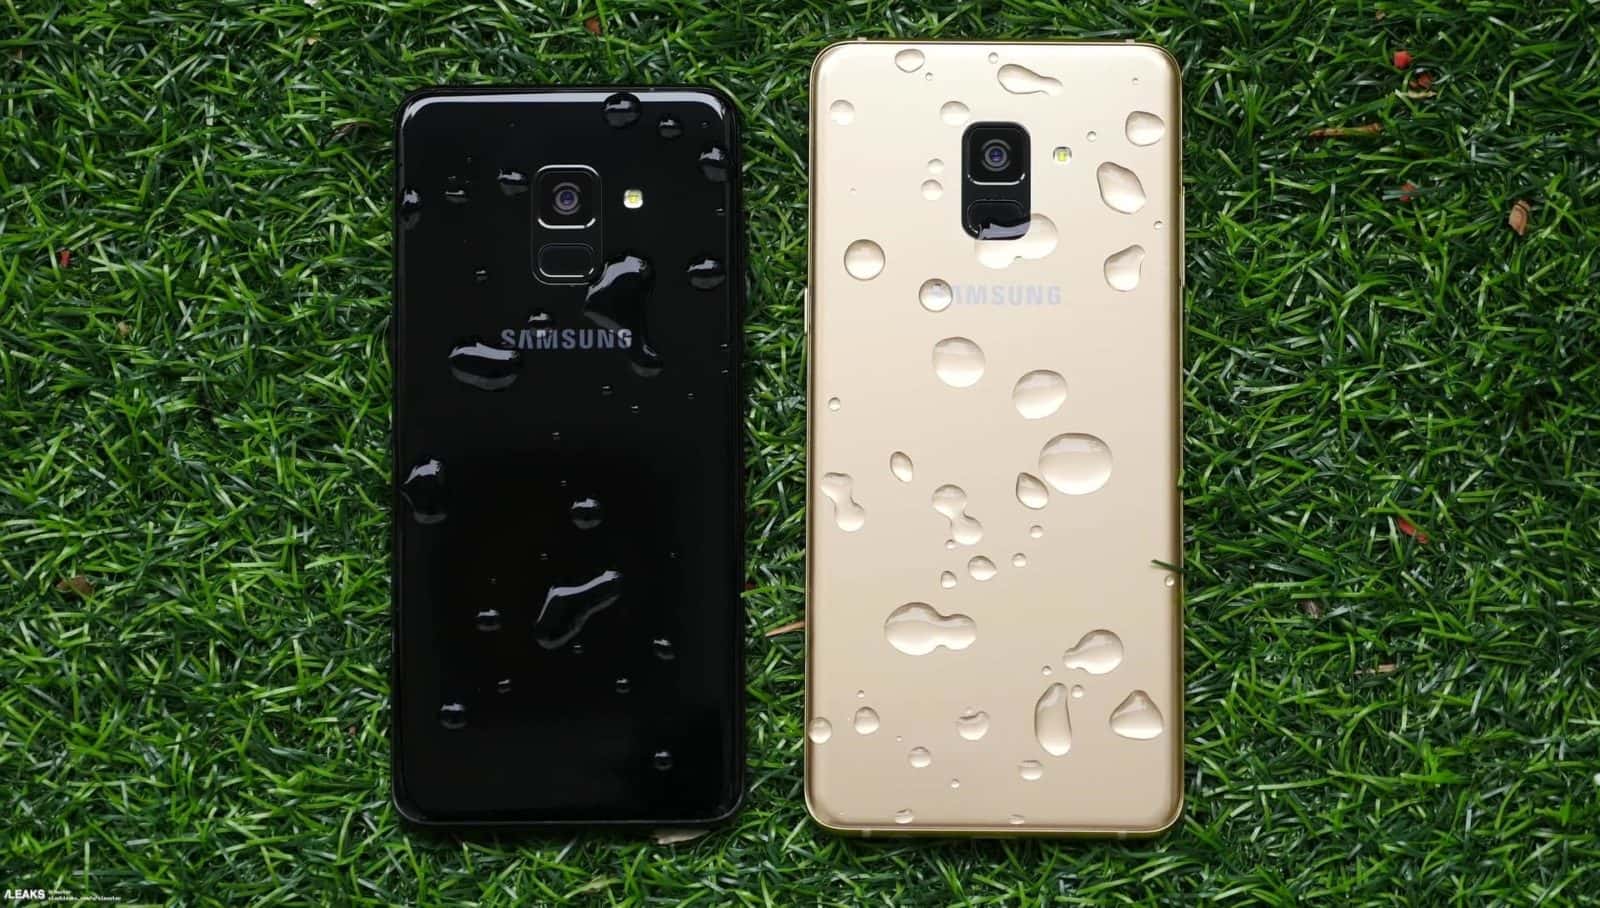 Samsung Galaxy A8 (2018) Specifications and Price in Kenya